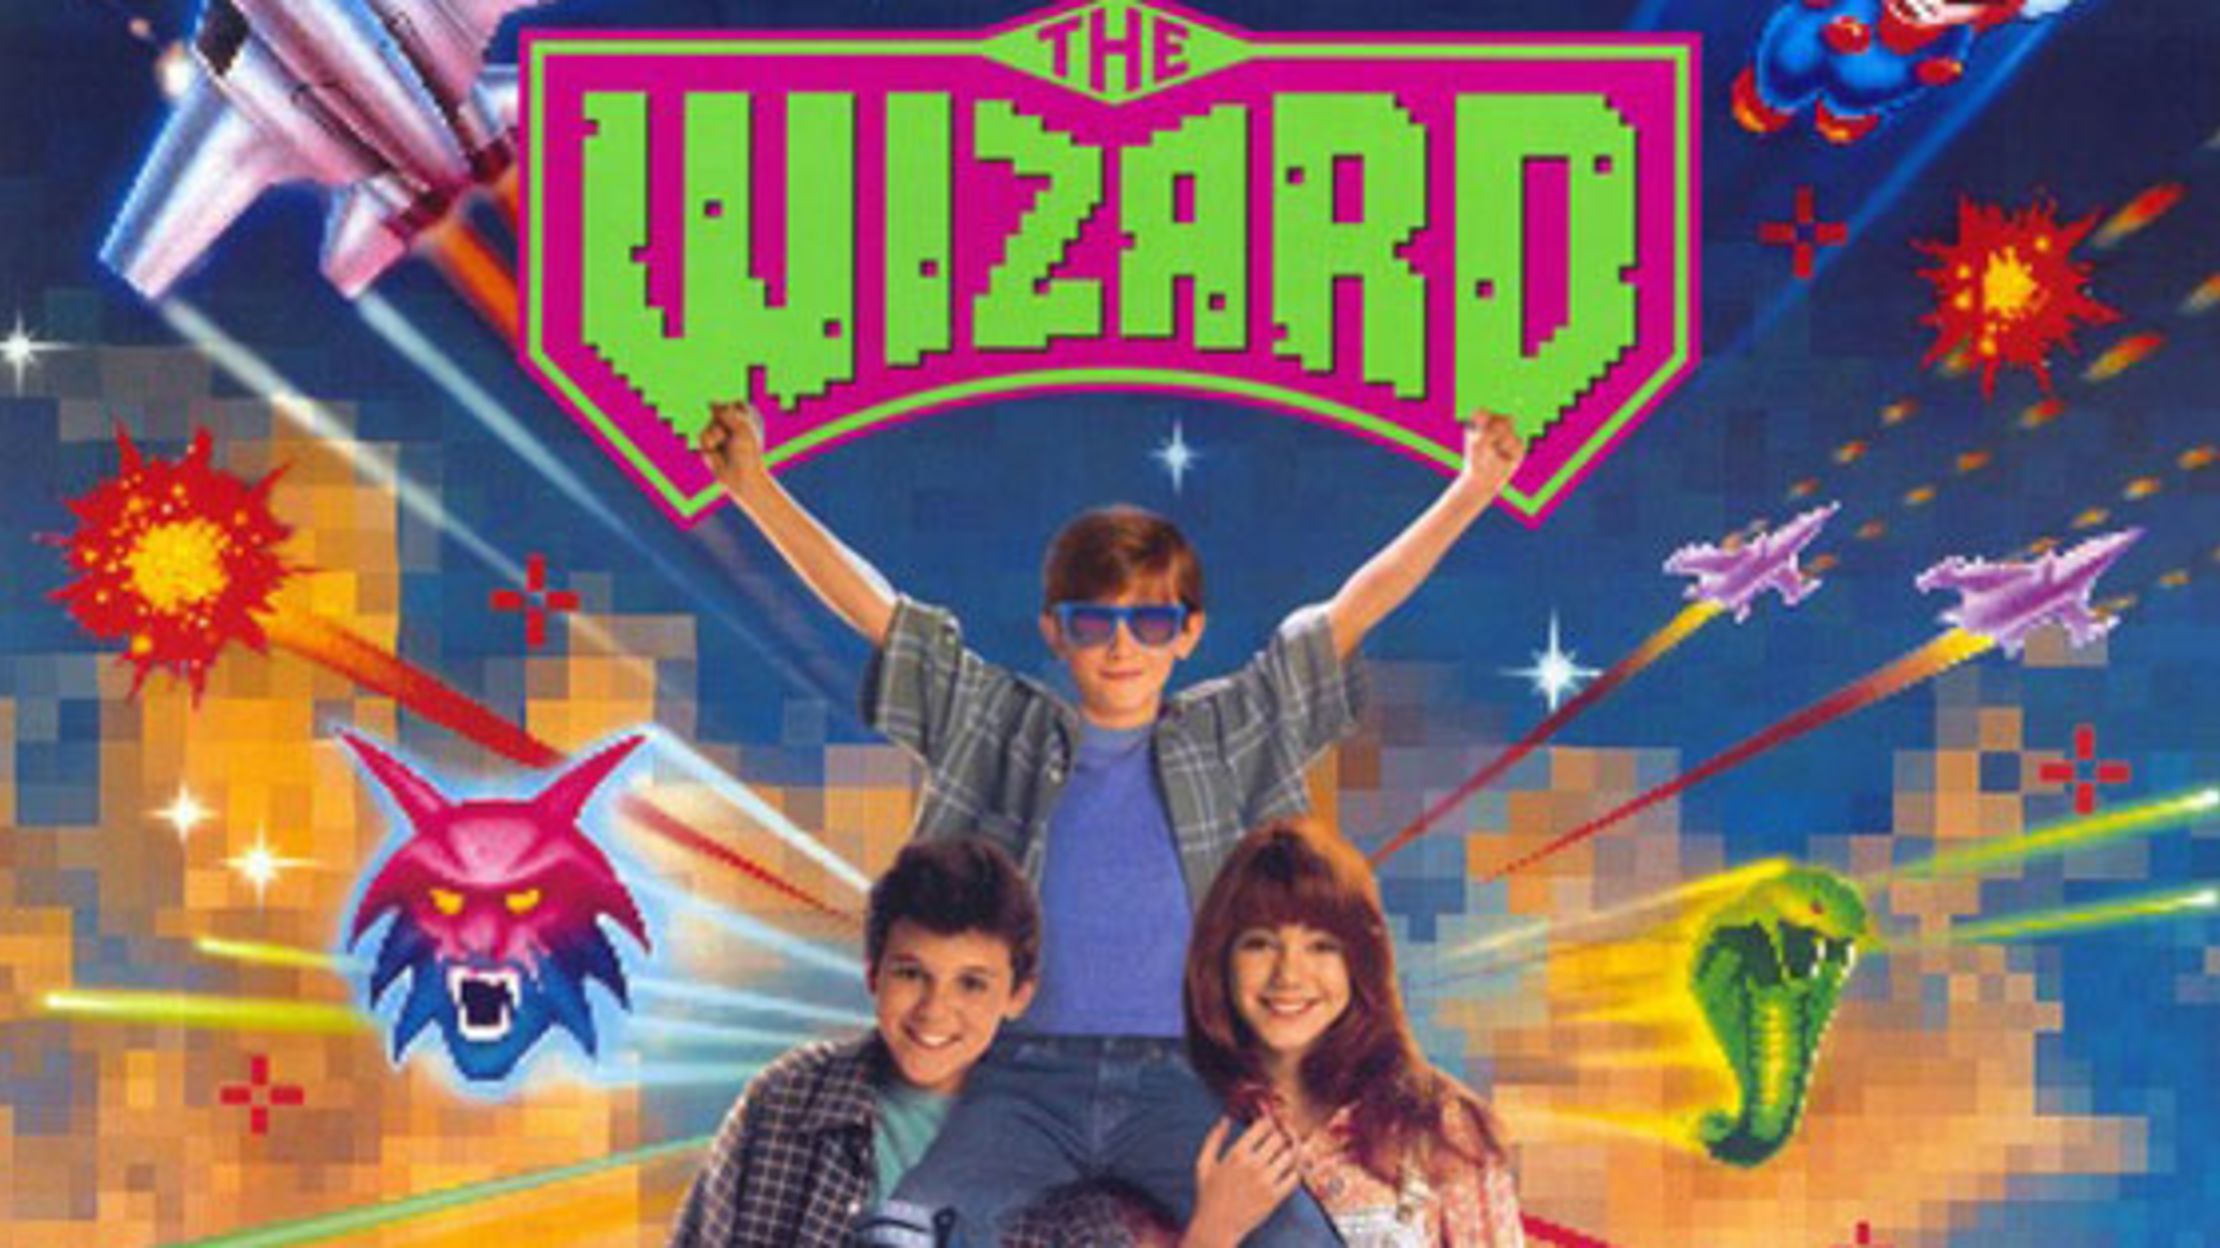 cringe worthy video game movies - The Wizard